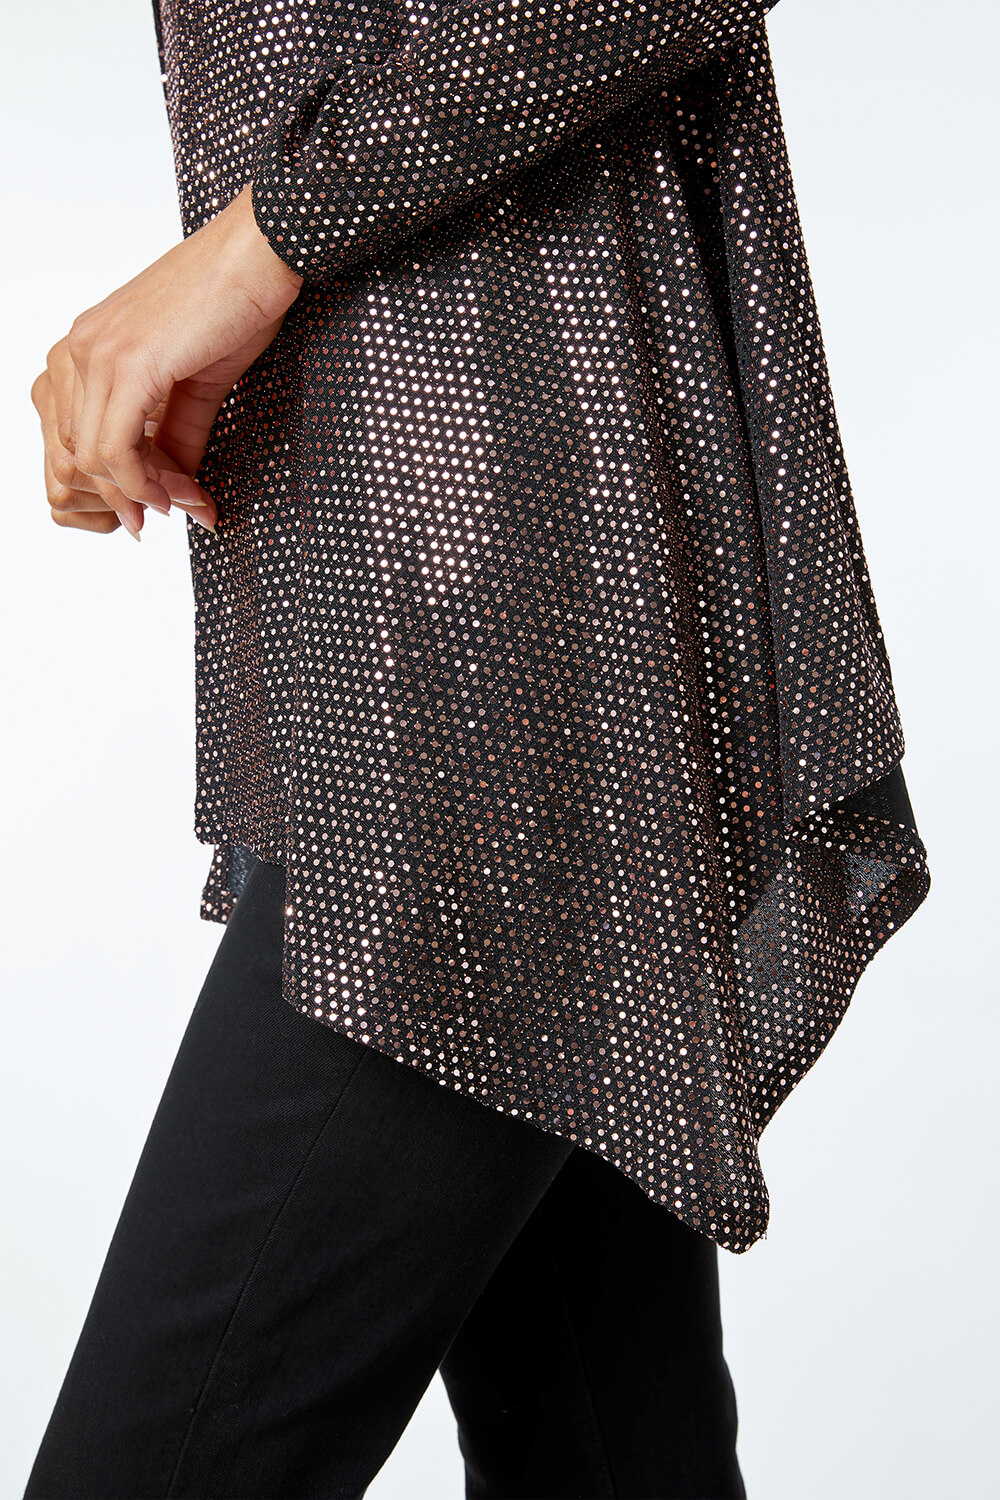 Bronze Sequin Sparkle Waterfall Stretch Jacket, Image 5 of 5